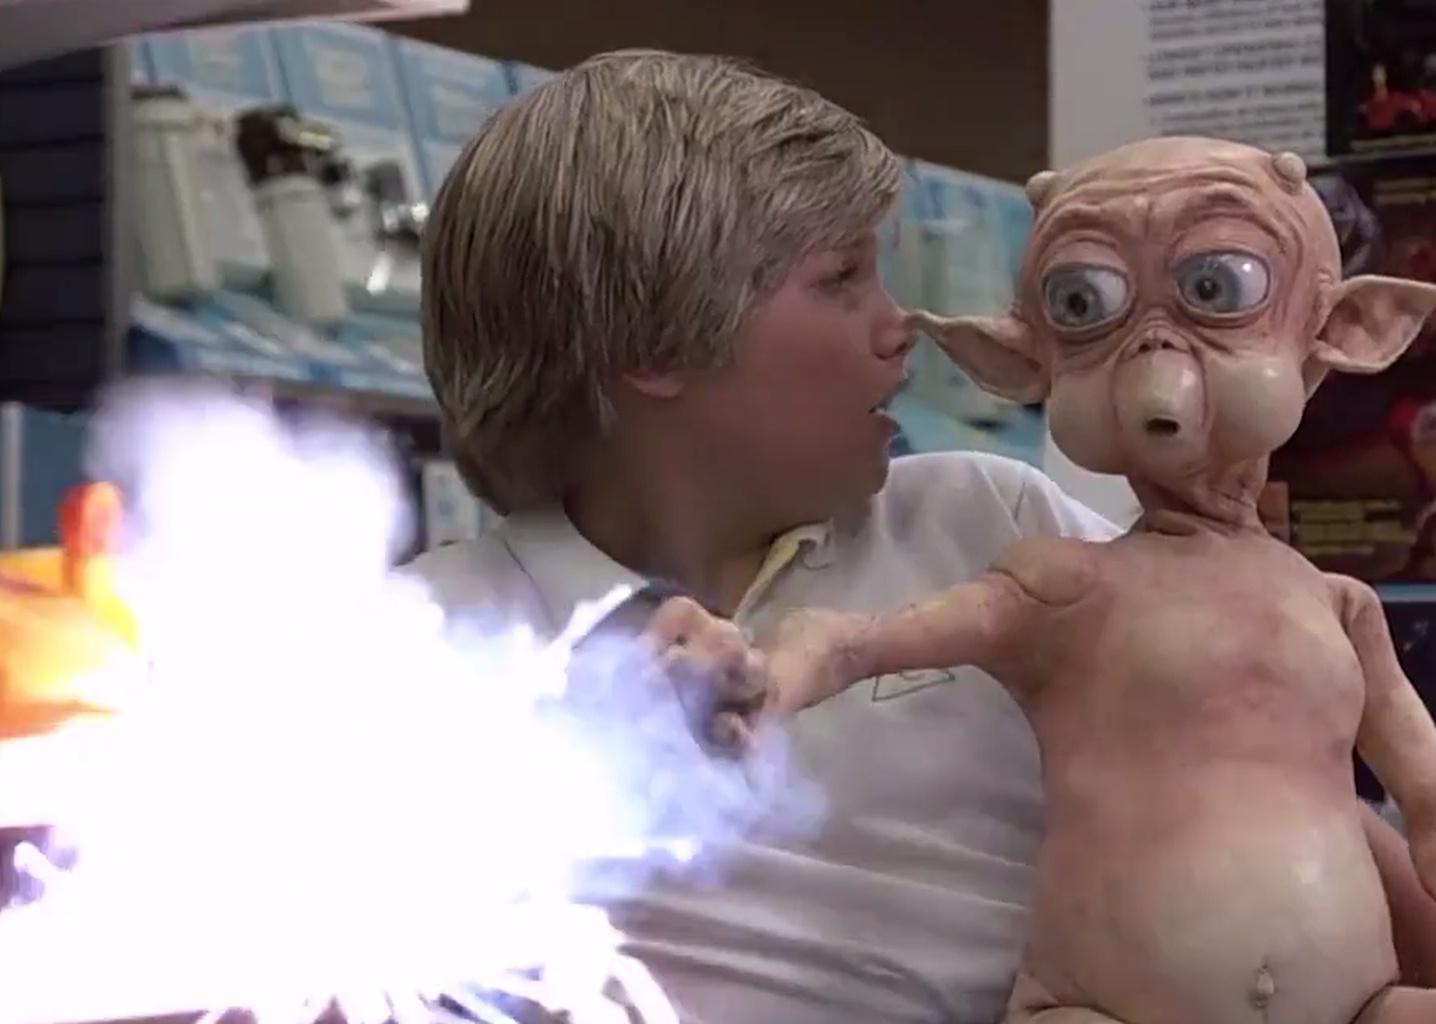 A blonde boy with an alien in his lap shooting light at something.